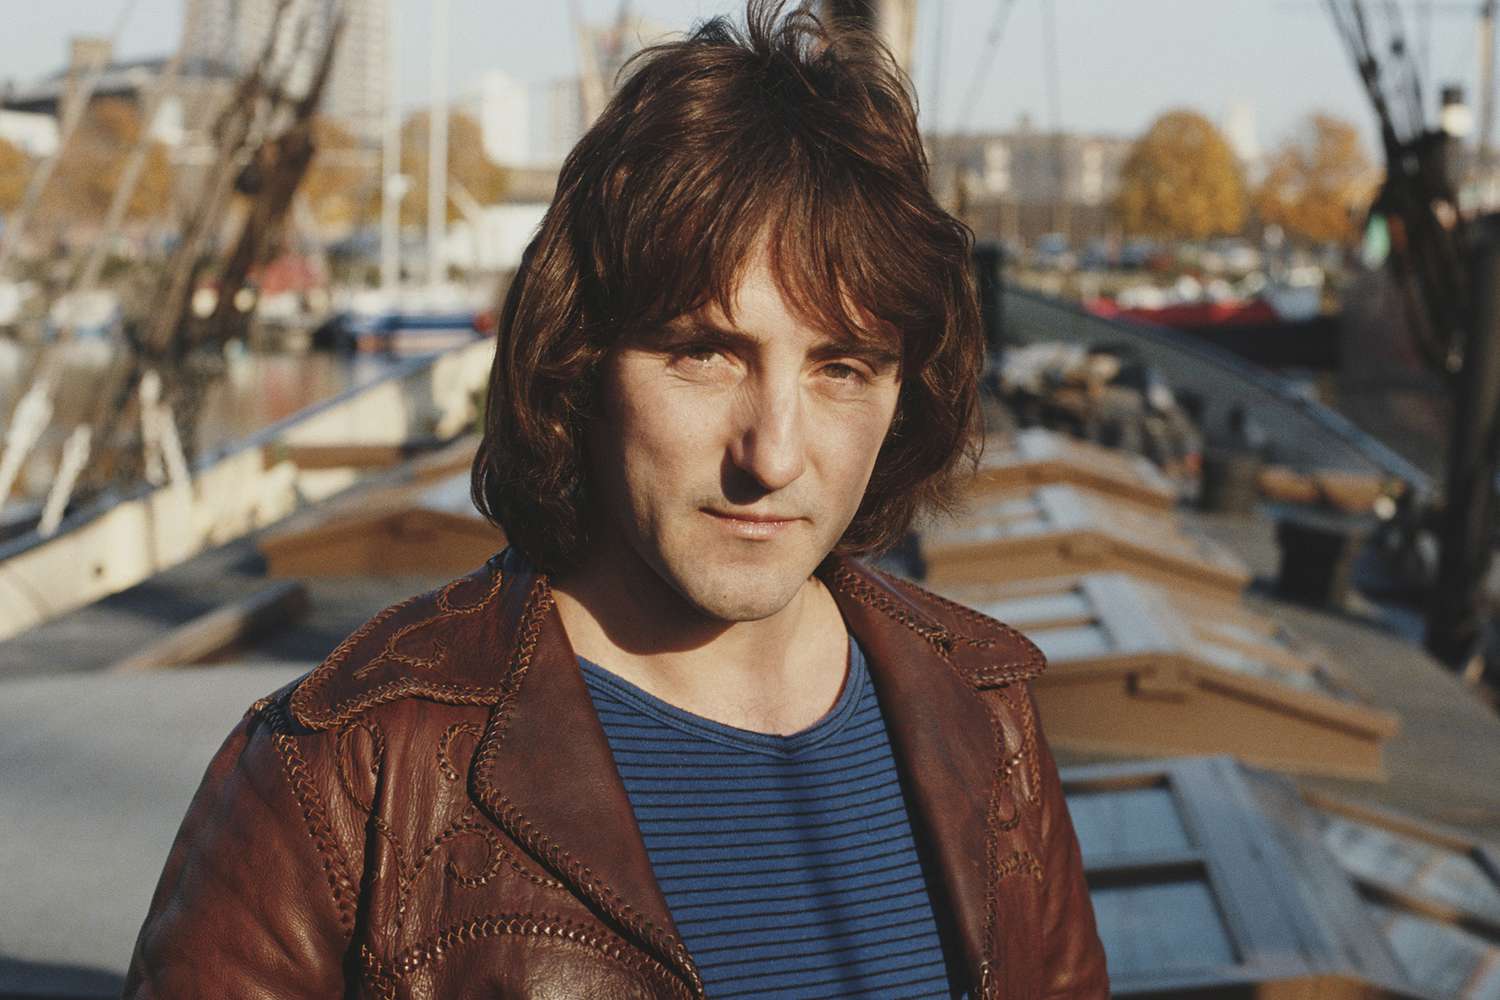 English singer-songwriter and former Wings and Moody Blues guitarist, Denny Laine posed wearing a leather jacket outside near an harbor 1981.